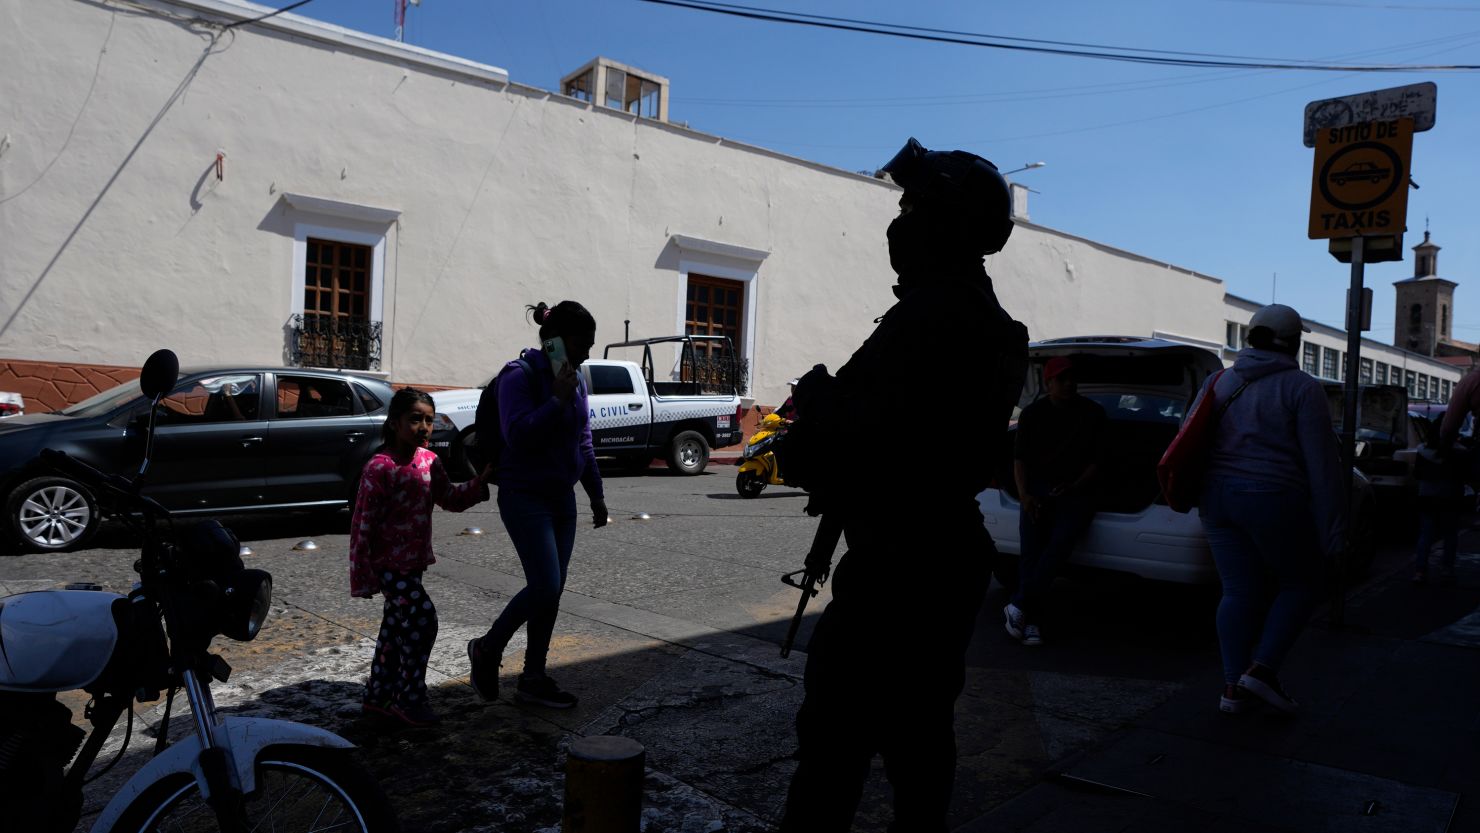 A municipal police officer stands guard in Maravatio, Michoacan state, Mexico, on February 27.